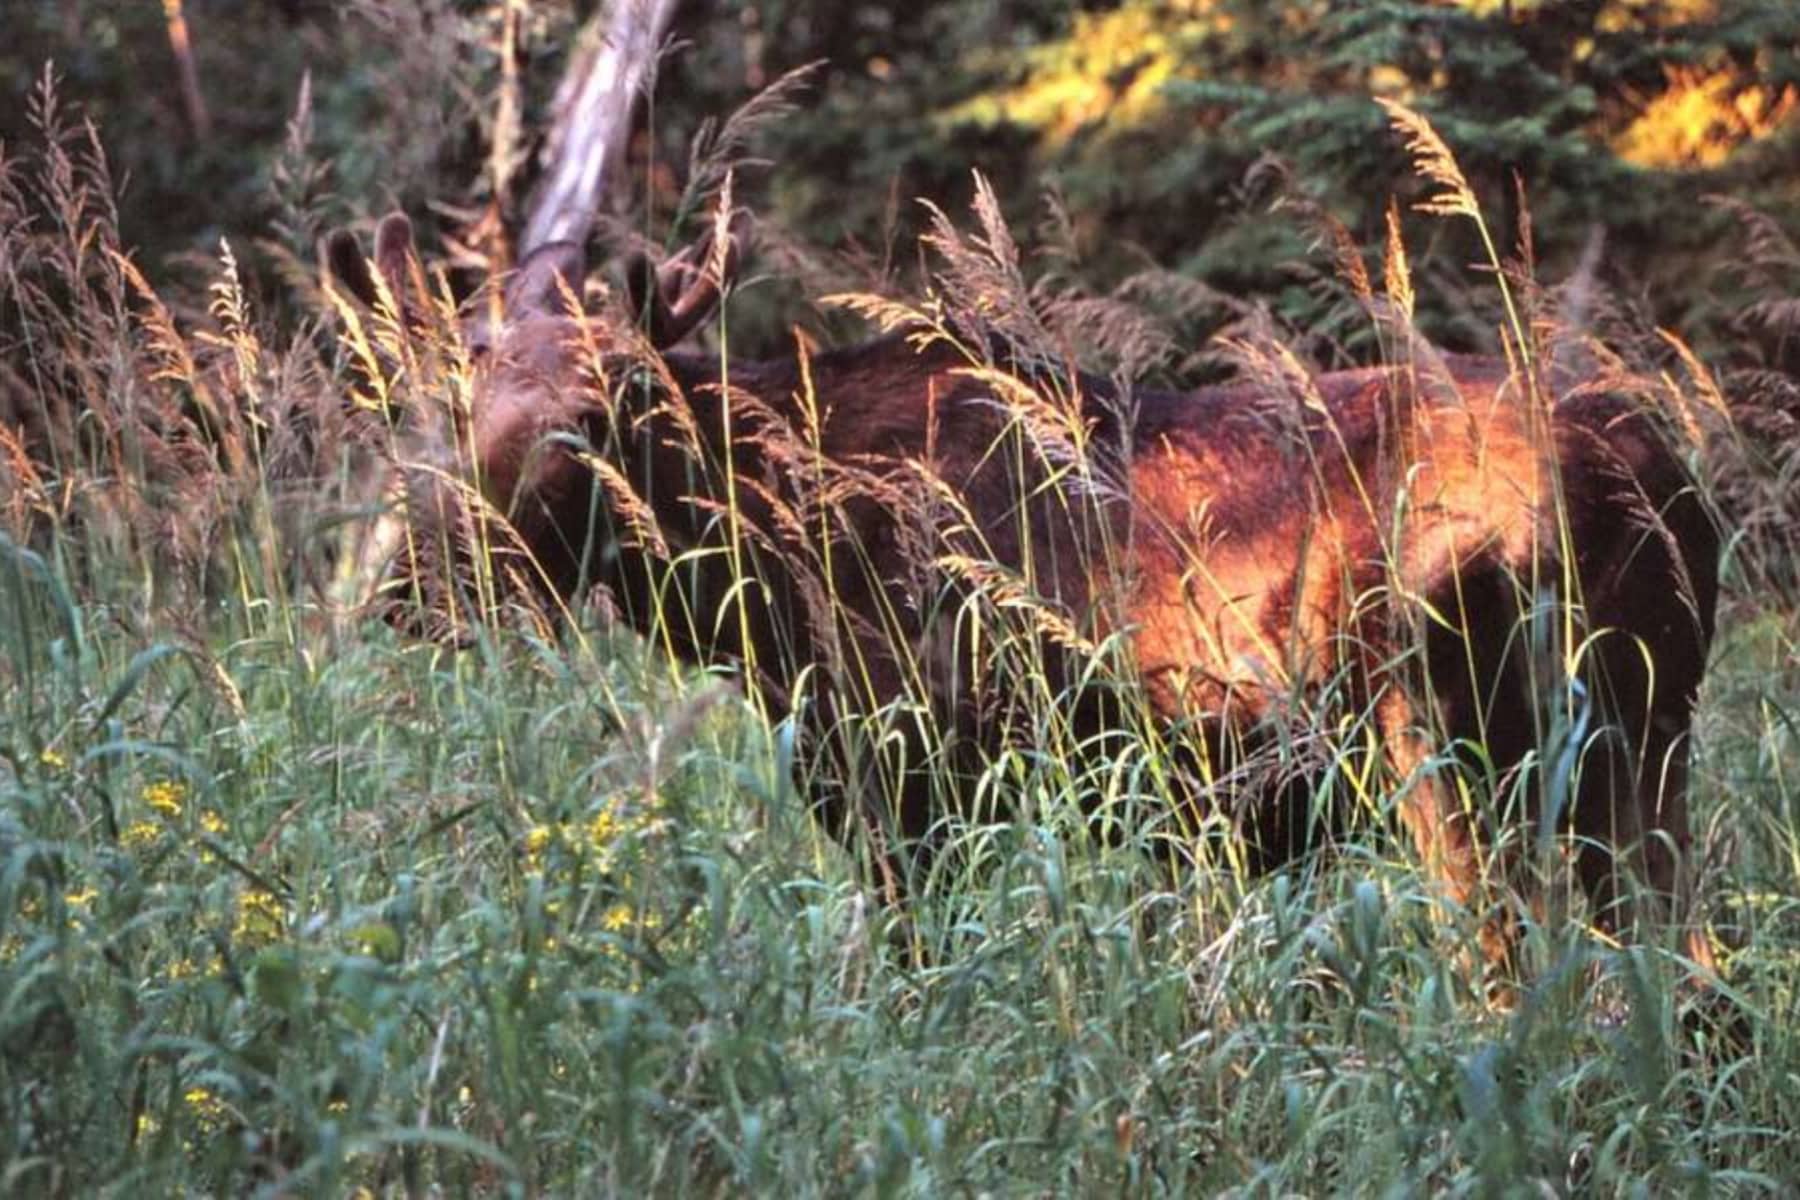 A moose behind trees and tall grasses in Isle Royale Michigan.